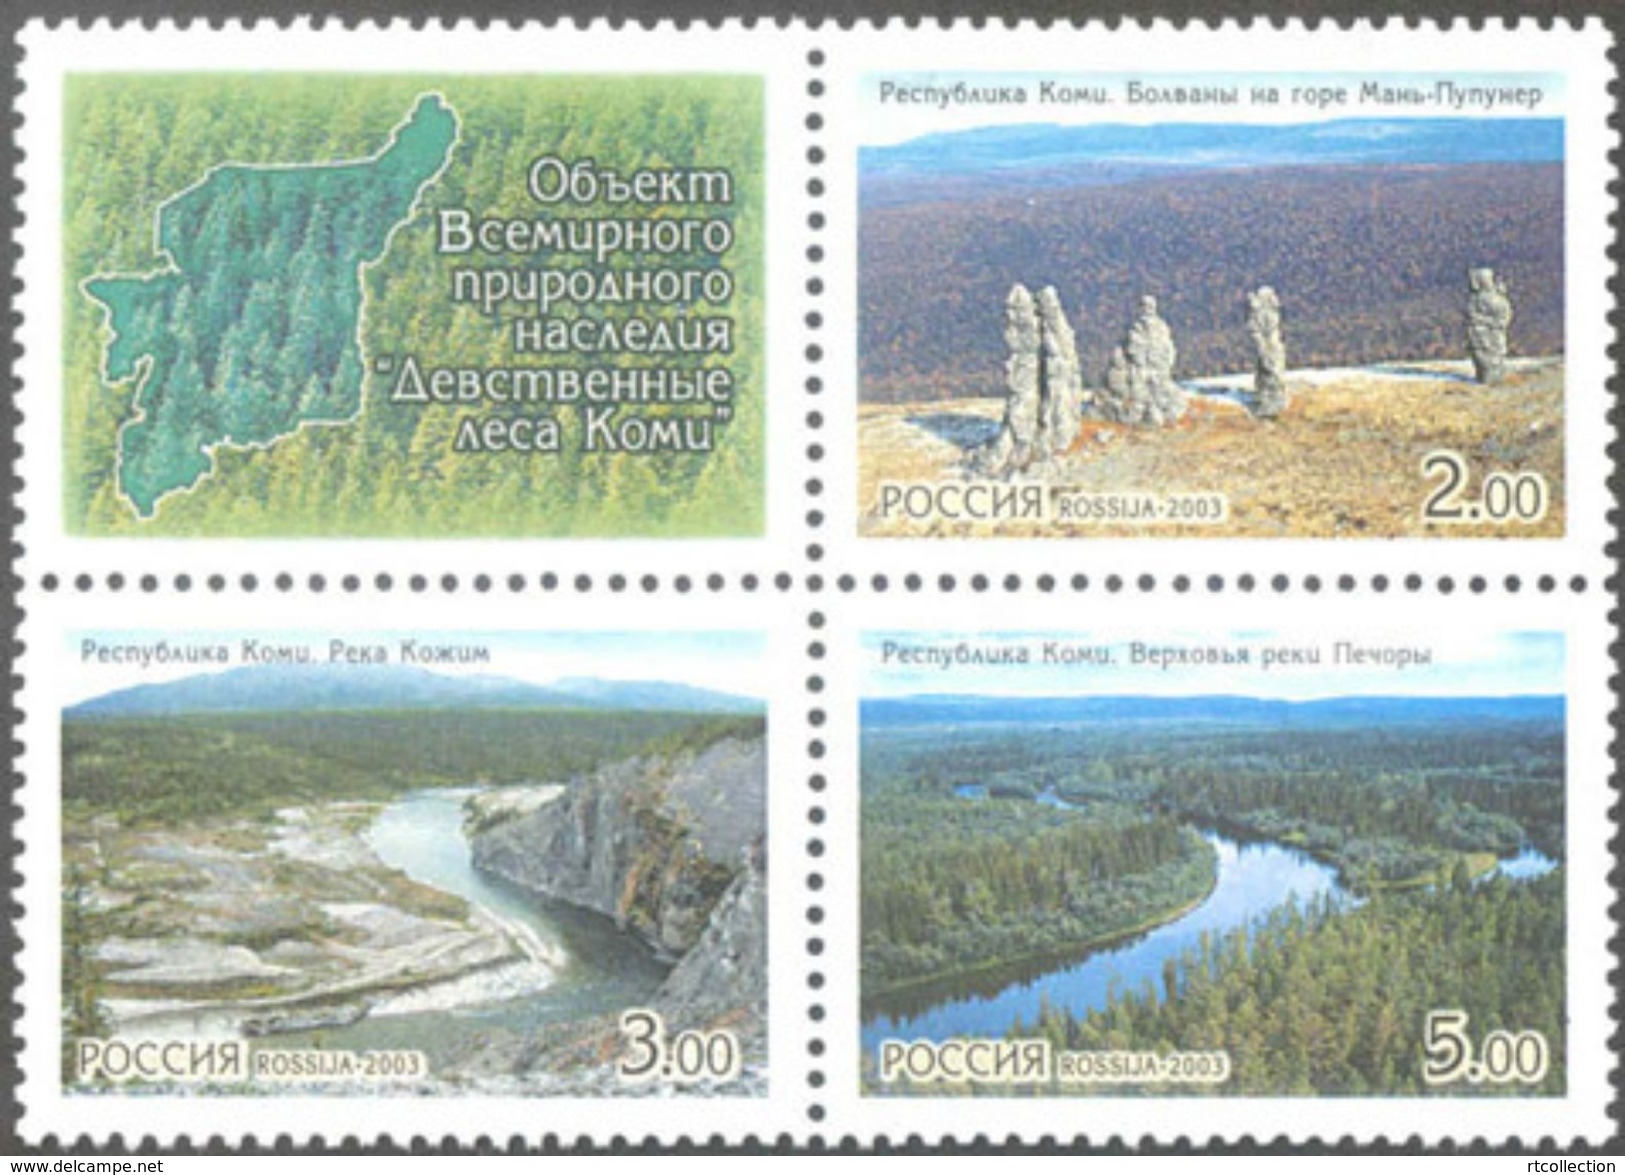 Russia 2003 Block World Natural Heritage Virgin Forest Komi Geography Nature River Mountain Places Stamps Mi 1096-1098Zf - Collections